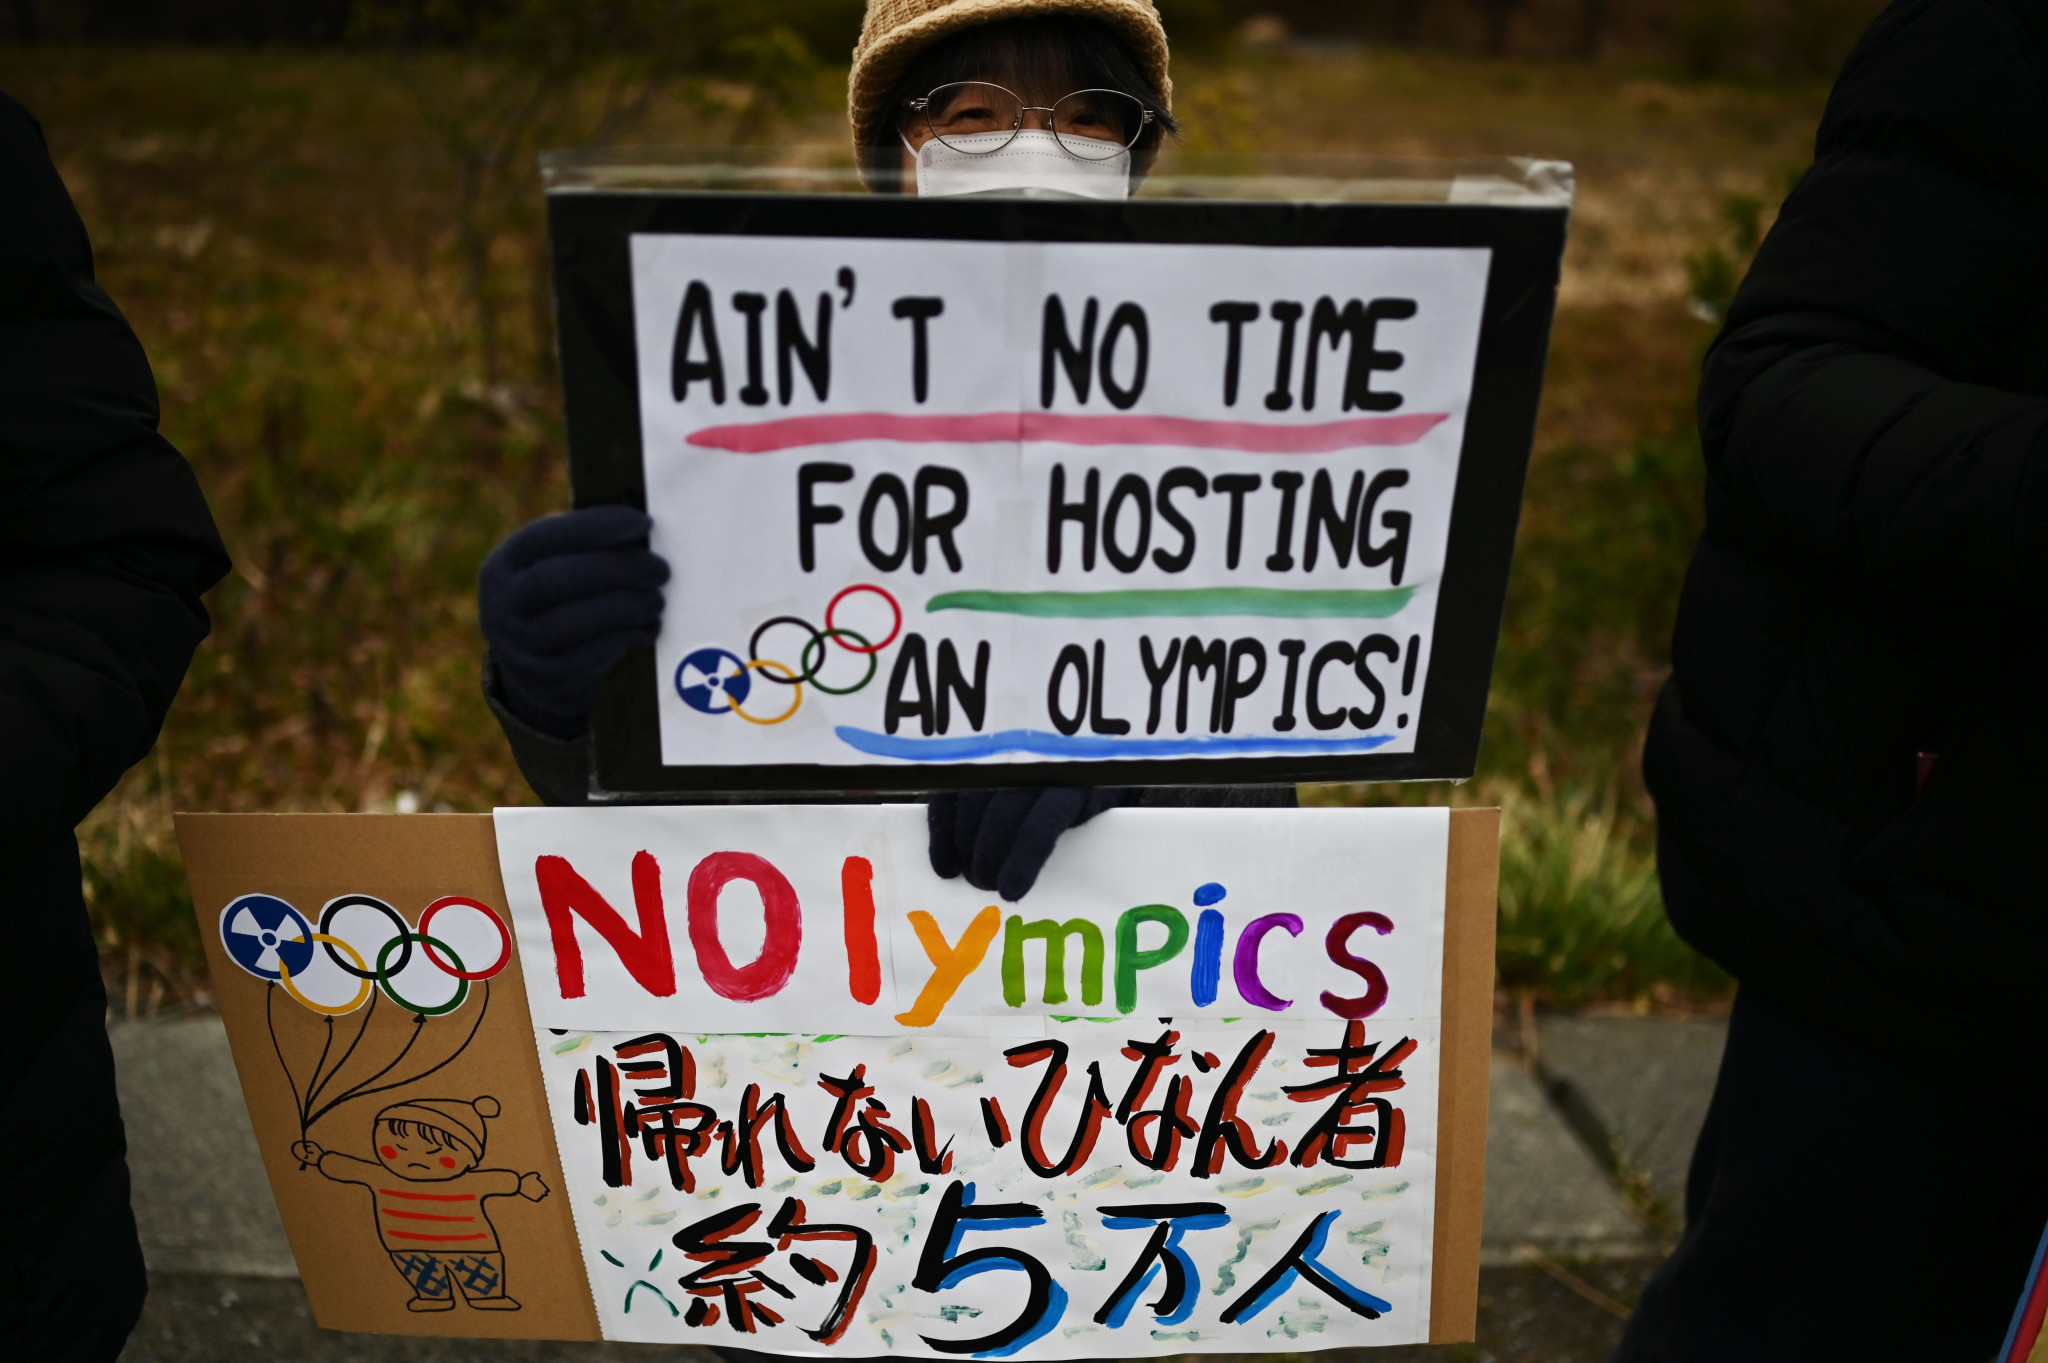 Protests have continued in recent months over the hosting of the Tokyo 2020 Olympics ©Getty Images